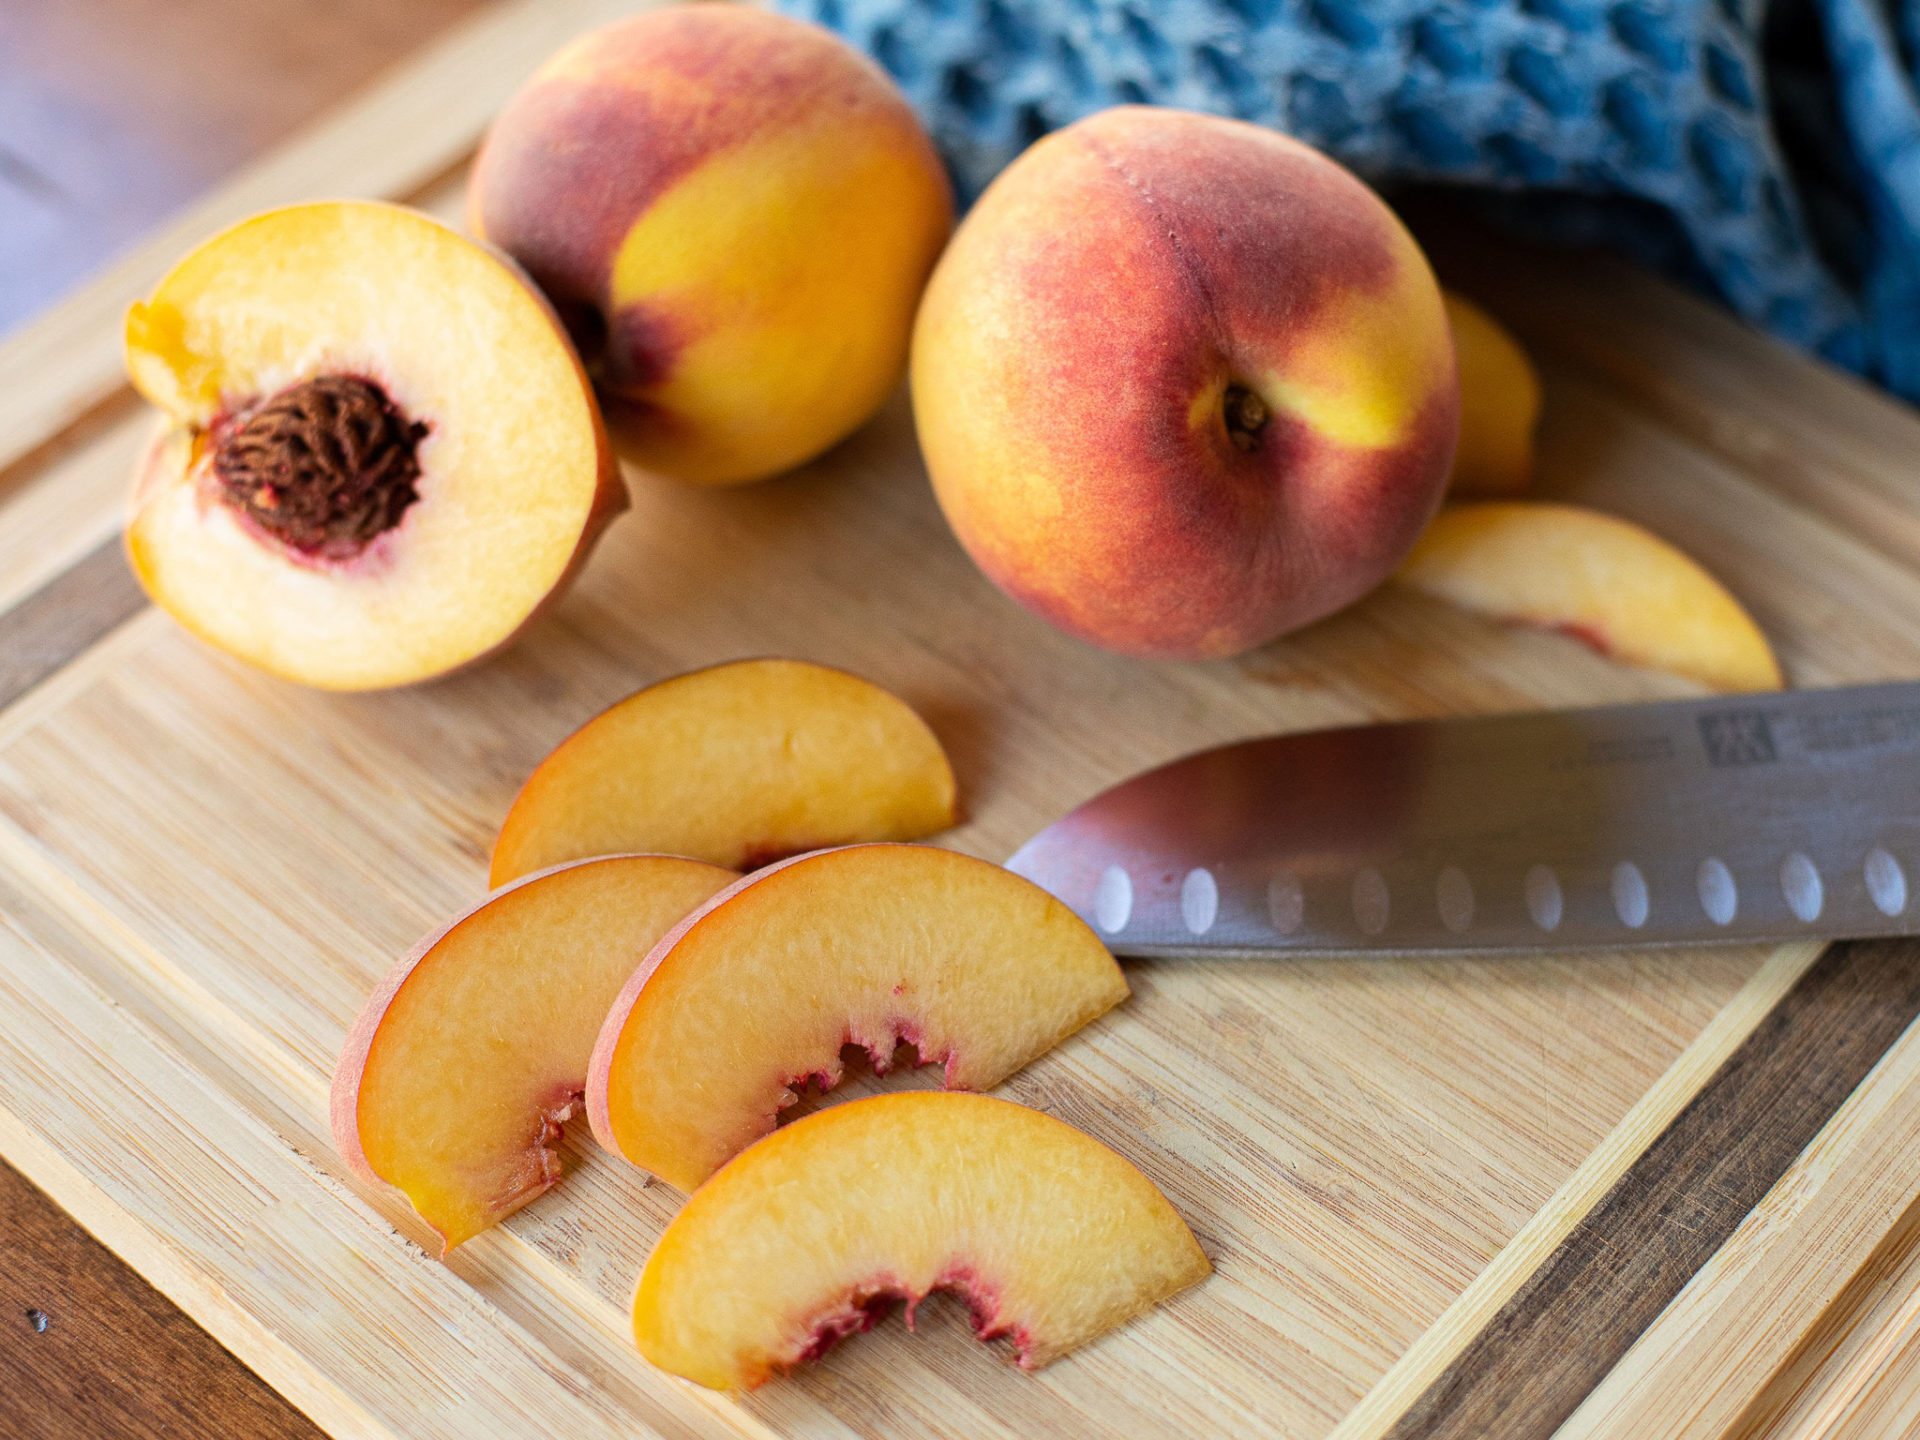 Peaches Only 89¢ Per Pound At Kroger